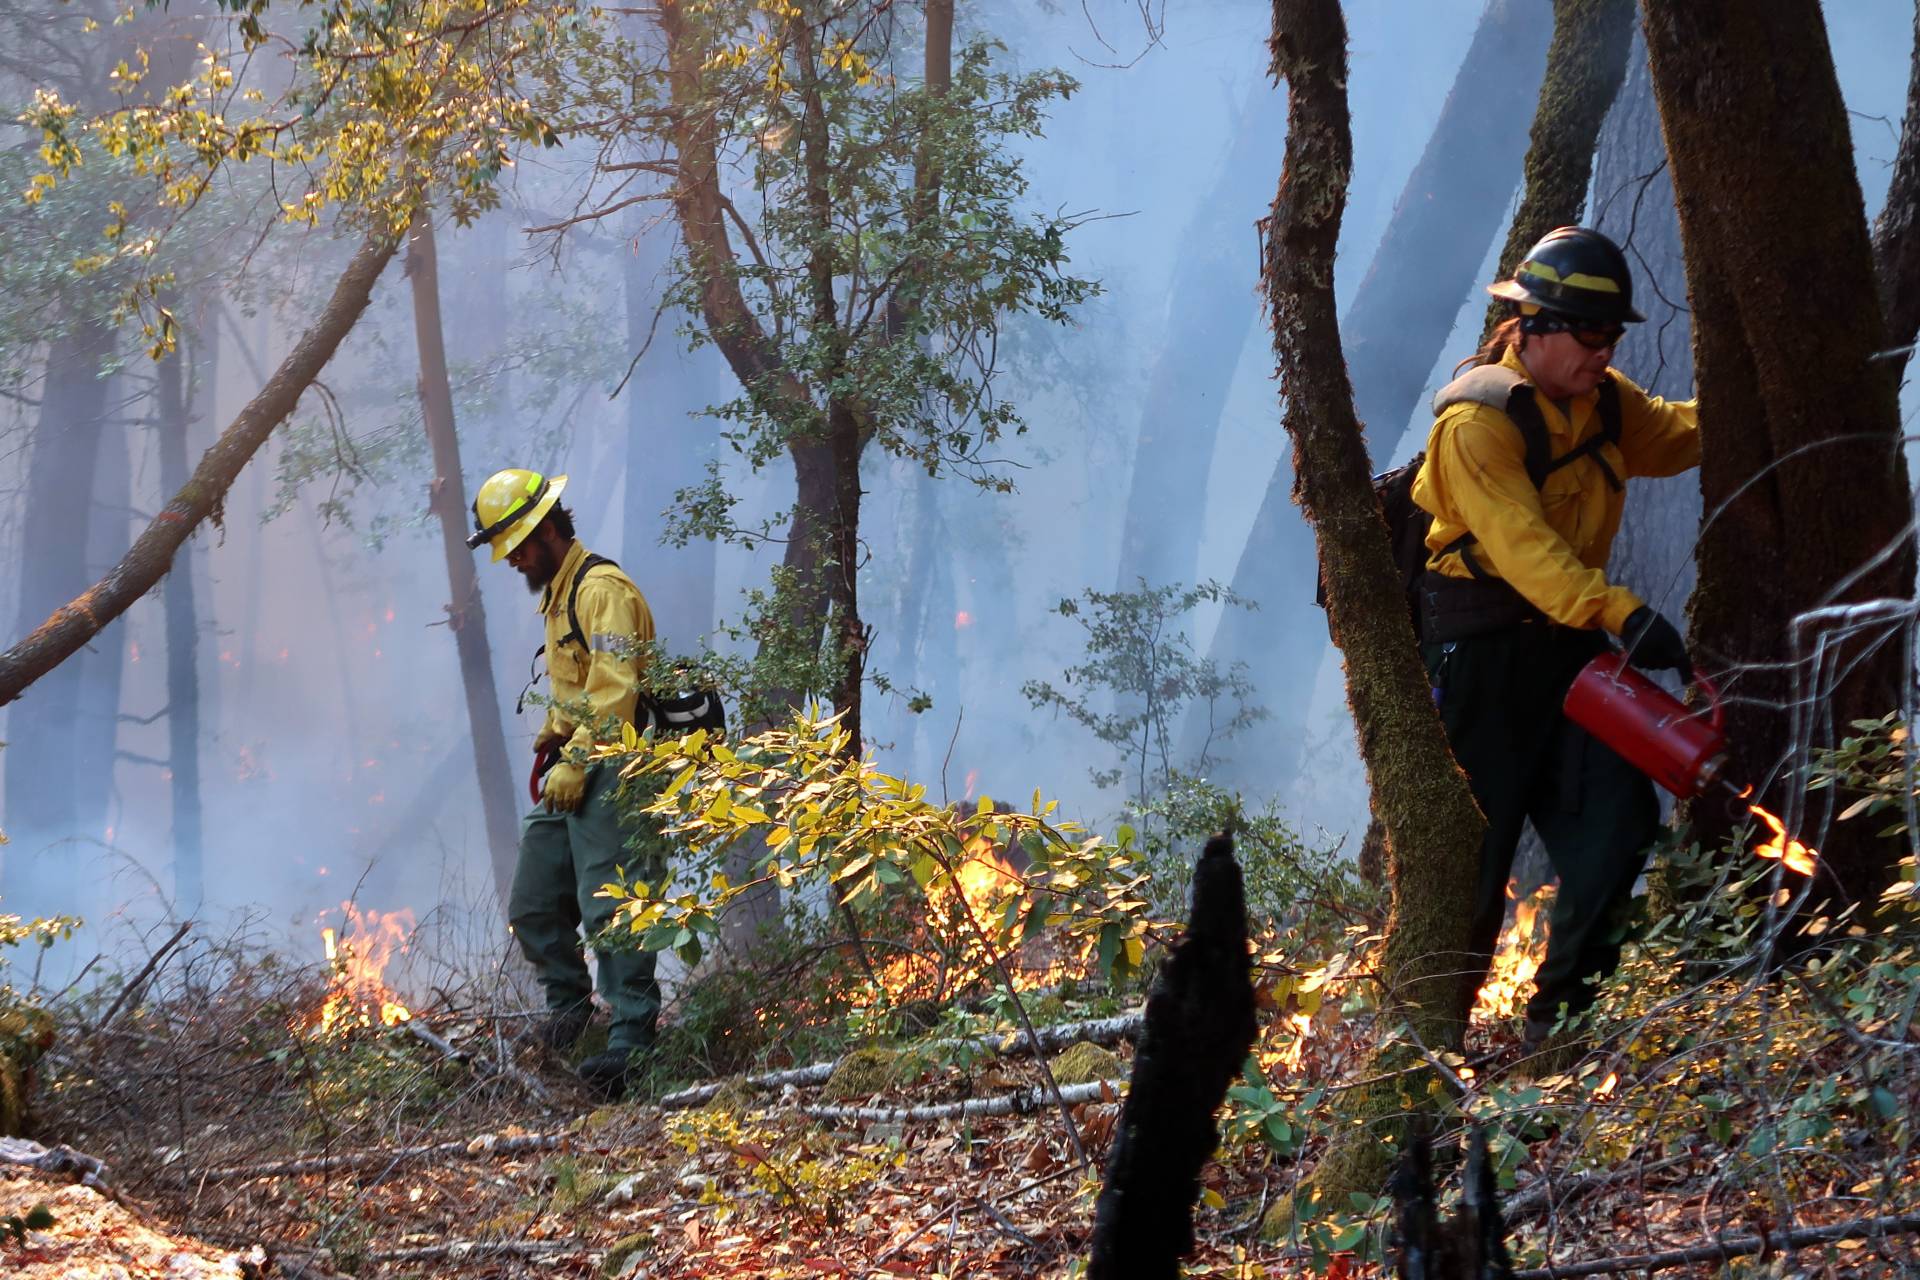 A multiagency prescribed fire training burn in 2019 in Six Rivers National Forest. Prescribed Fire Training Exchange